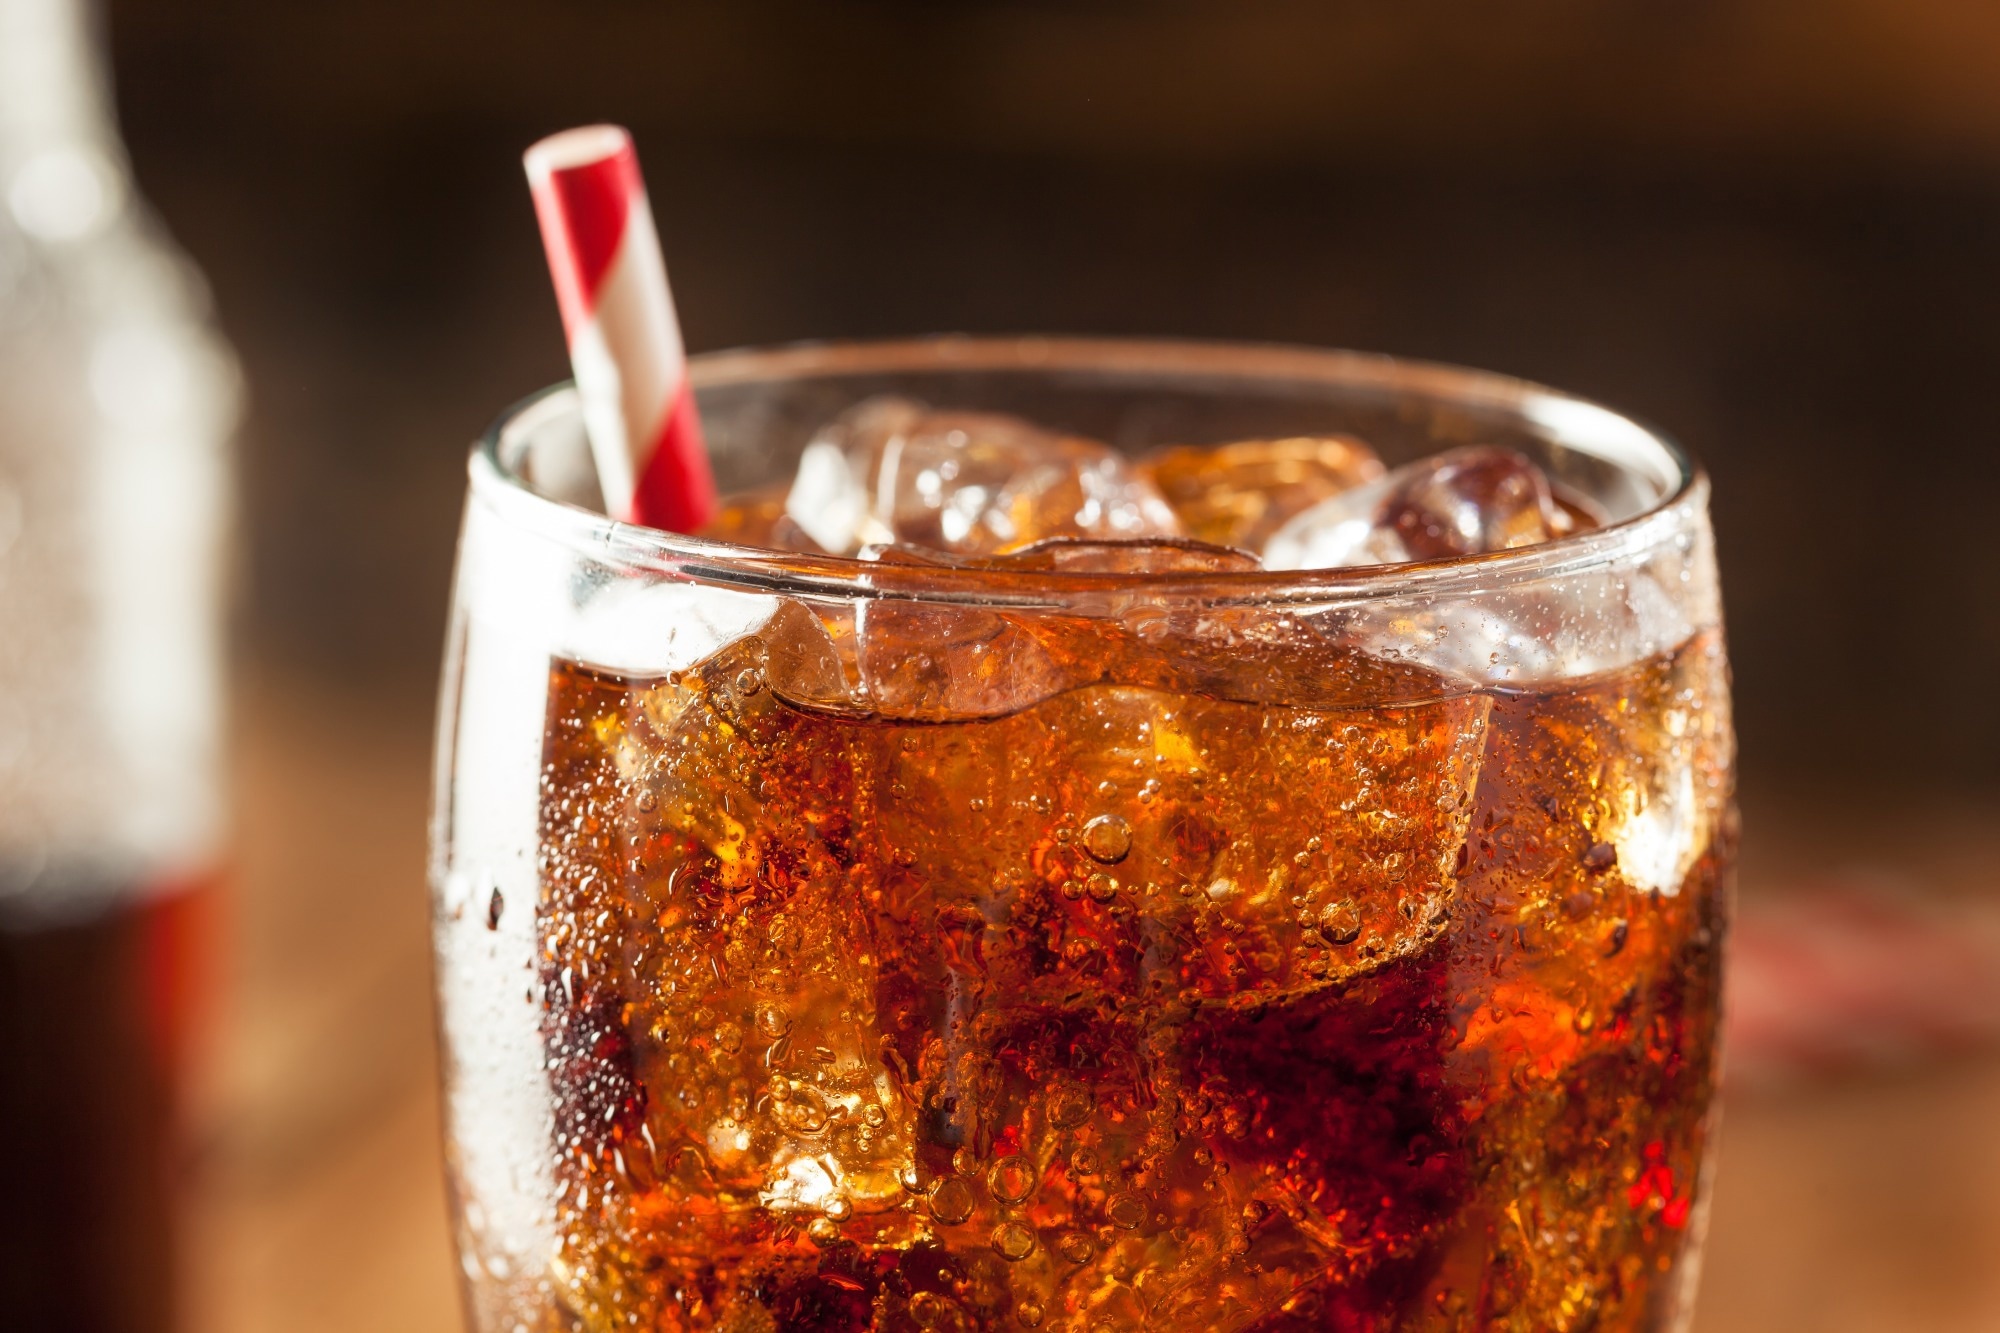 Study: National taxation on sugar-sweetened beverages and its association with overweight, obesity, and diabetes. Image Credit: Brent Hofacker / Shutterstock.com